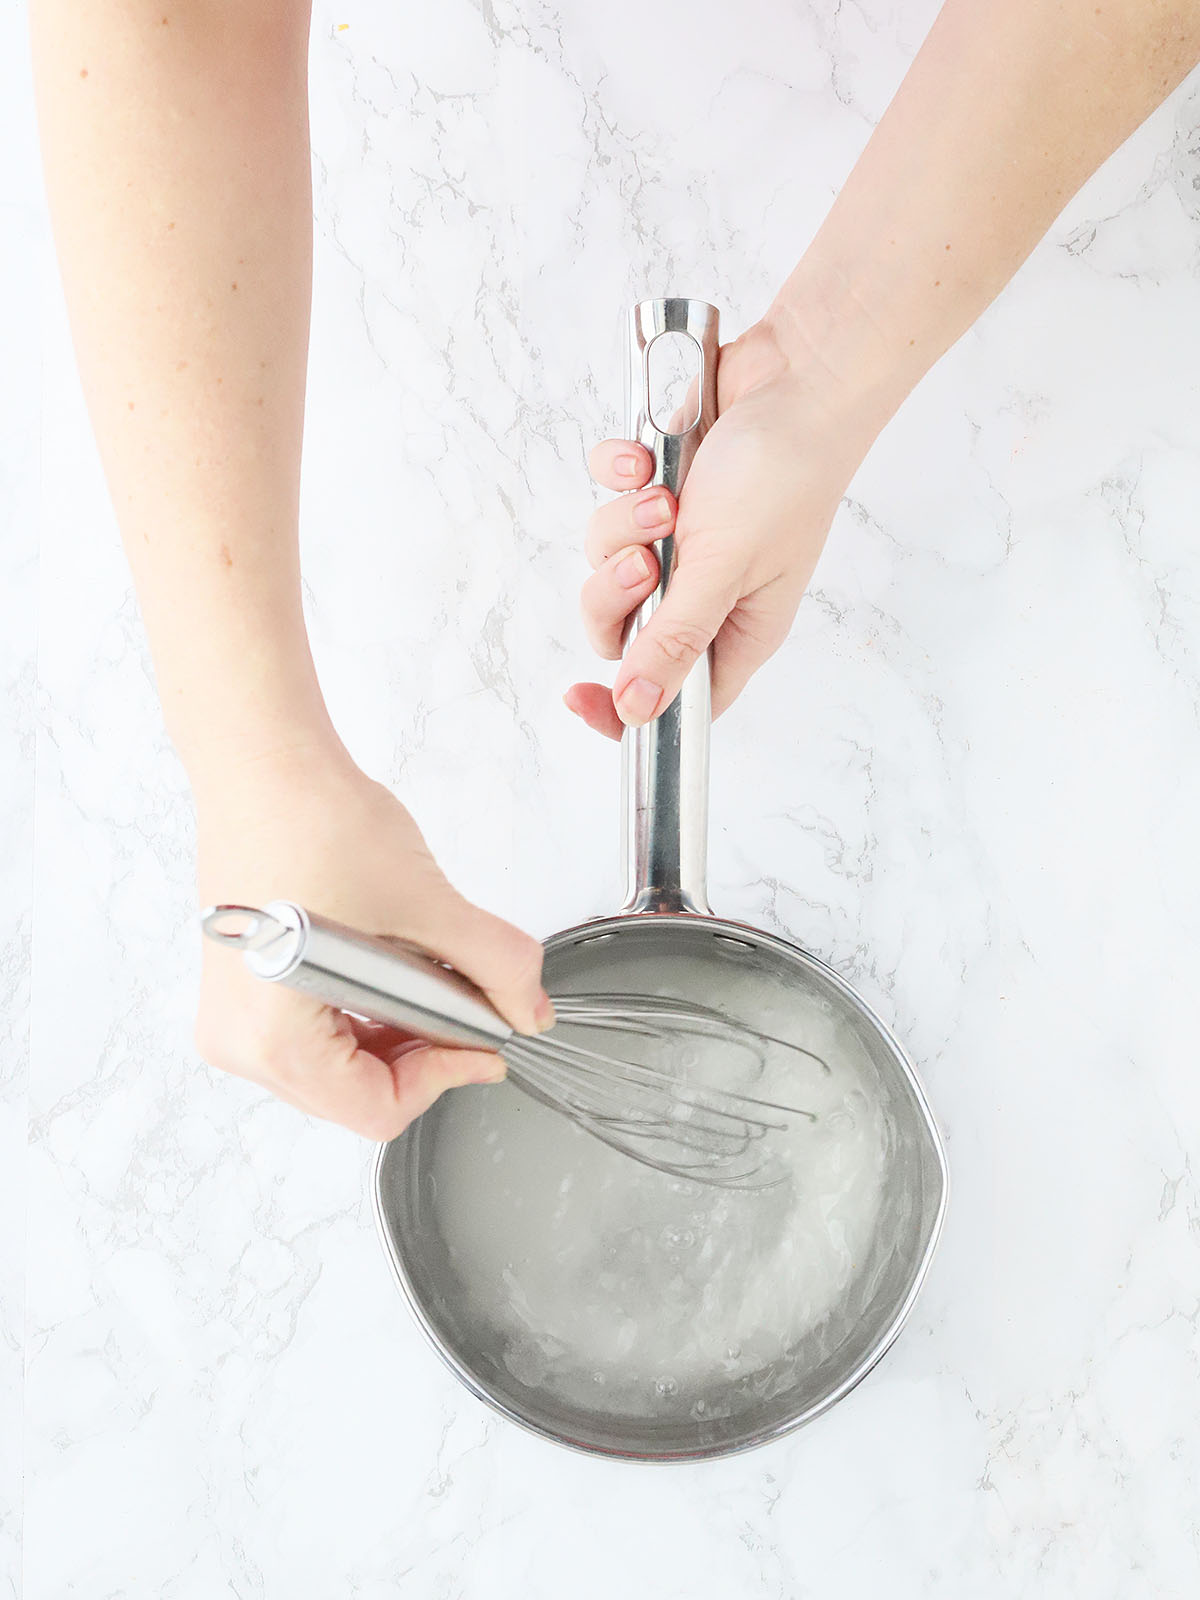 hand whisking sugar and water together in a stainless steel saucepan